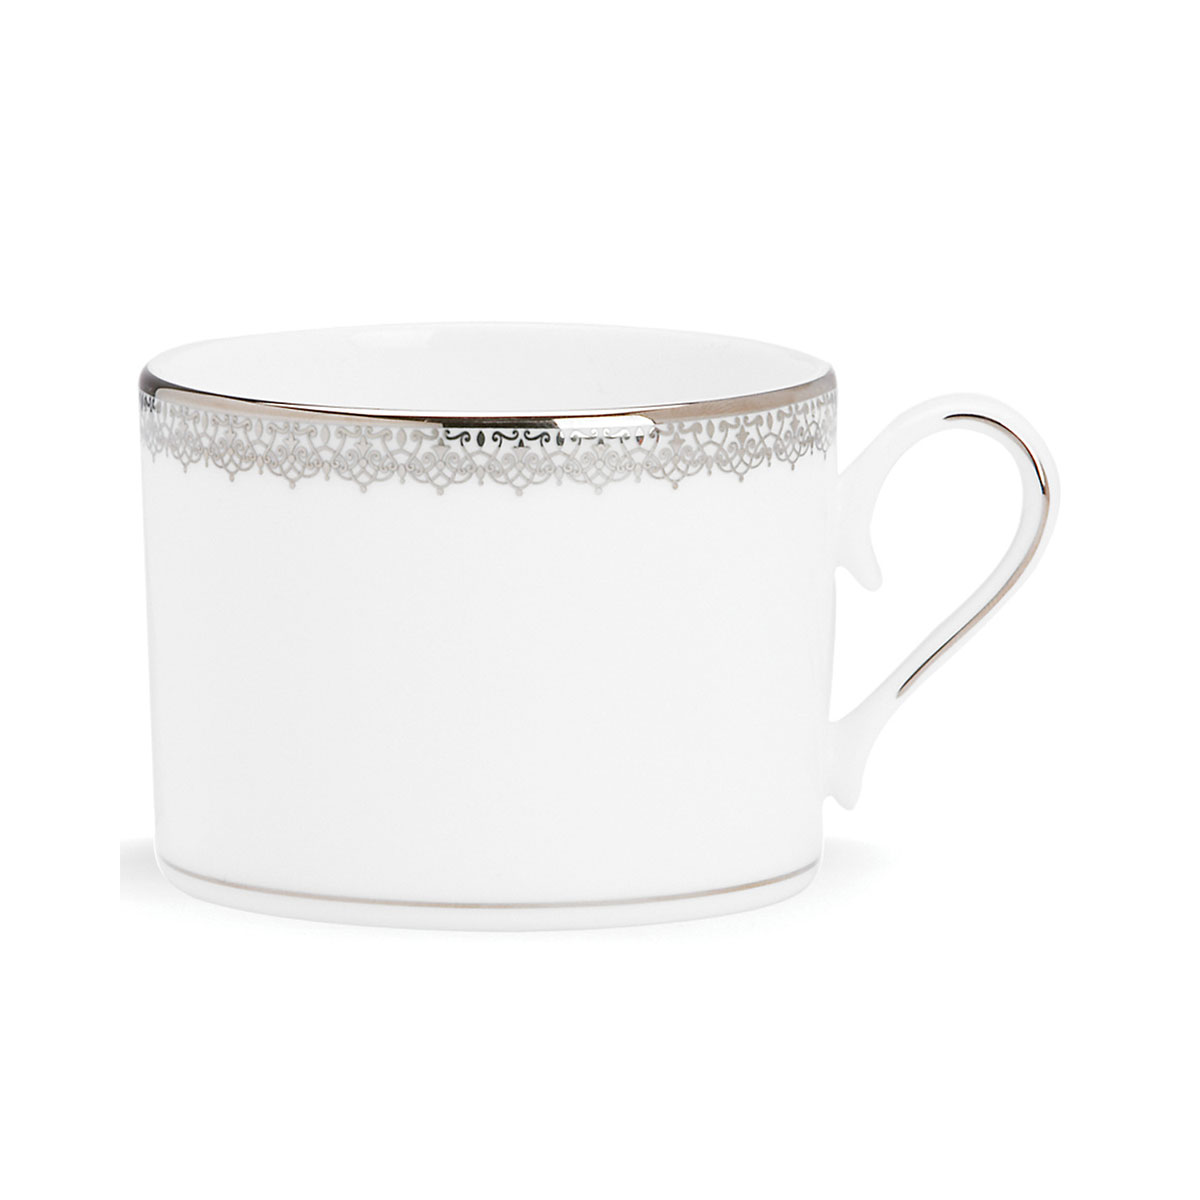 Lenox Lace Couture Dinnerware Cup